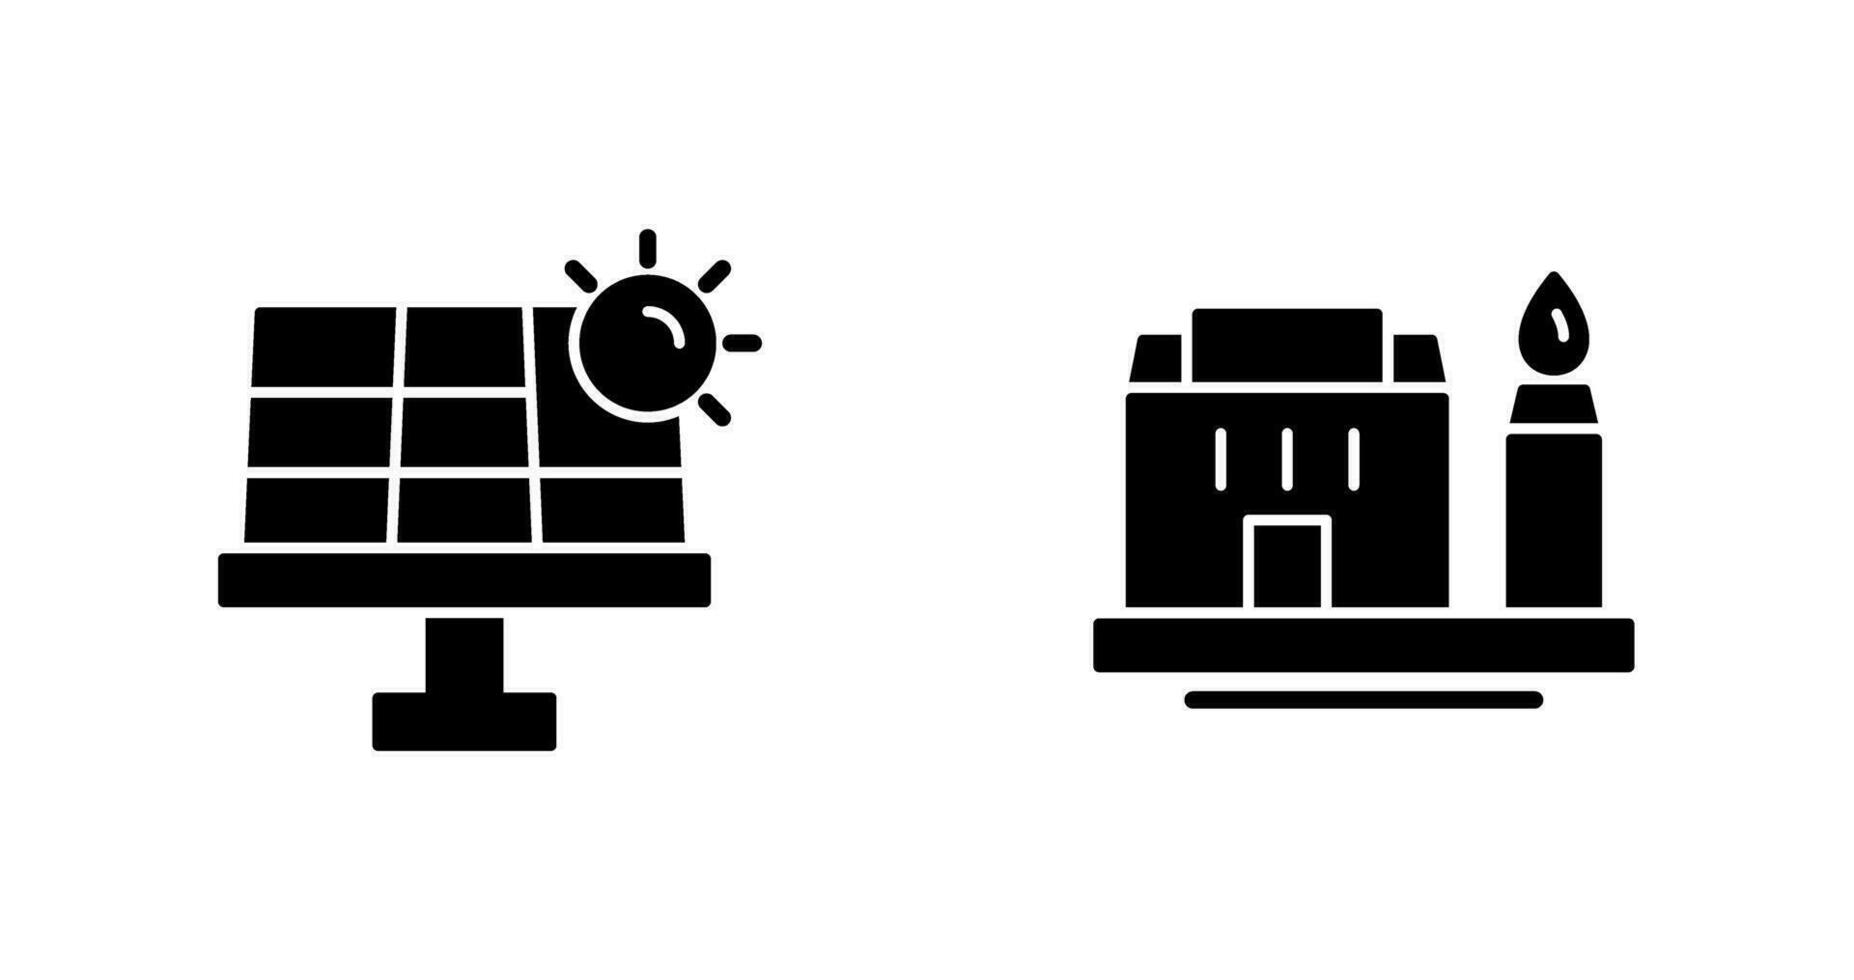 Solar Energy and Factory Icon vector